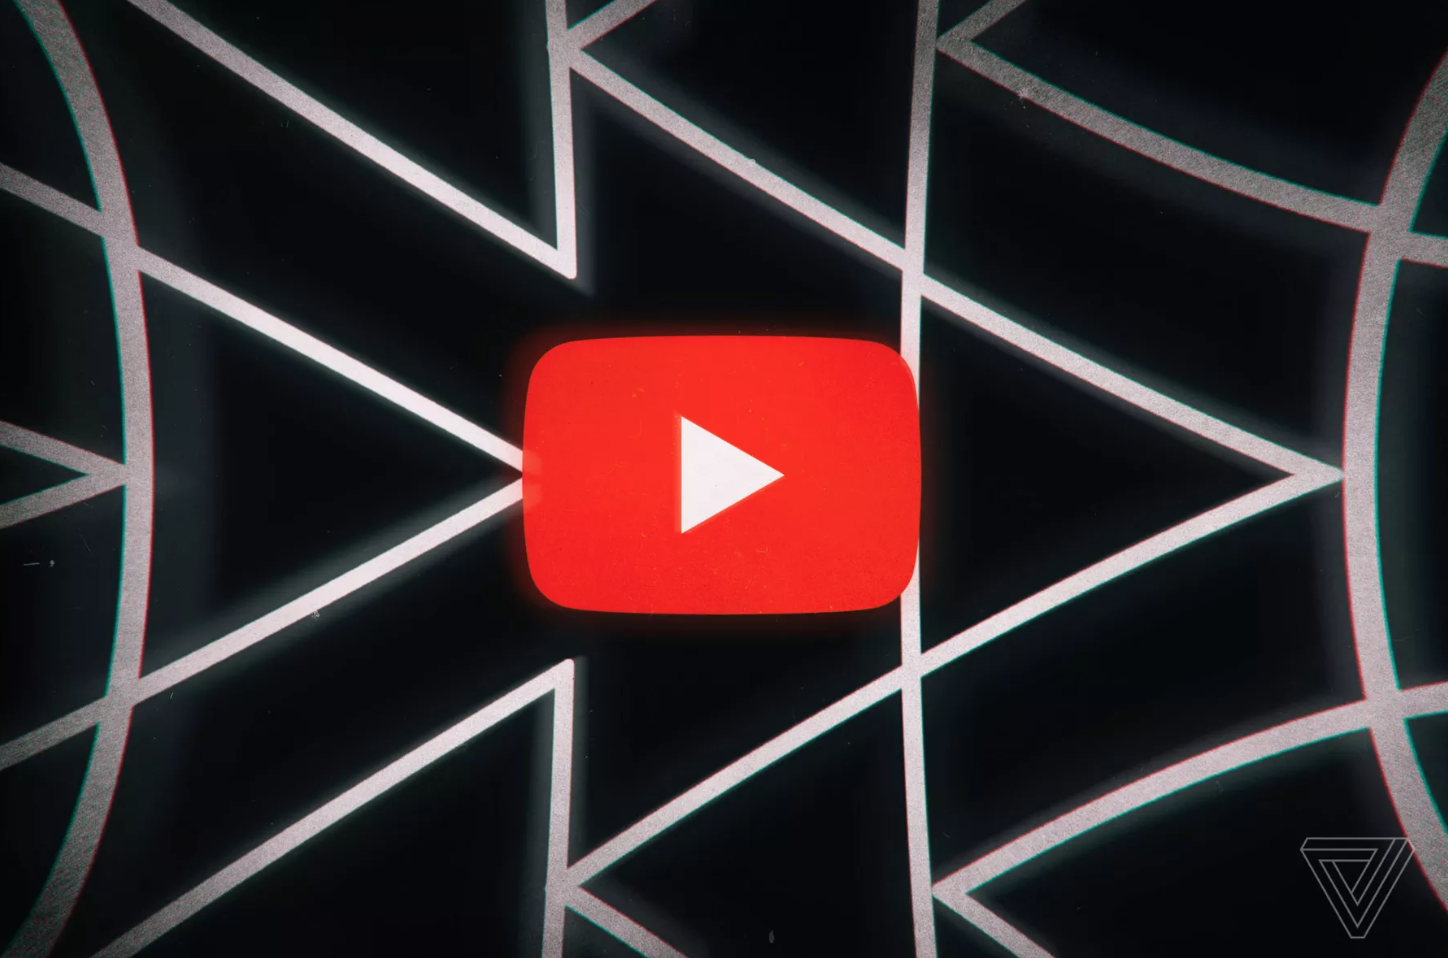 The youtube logo in front of a set of mirrors